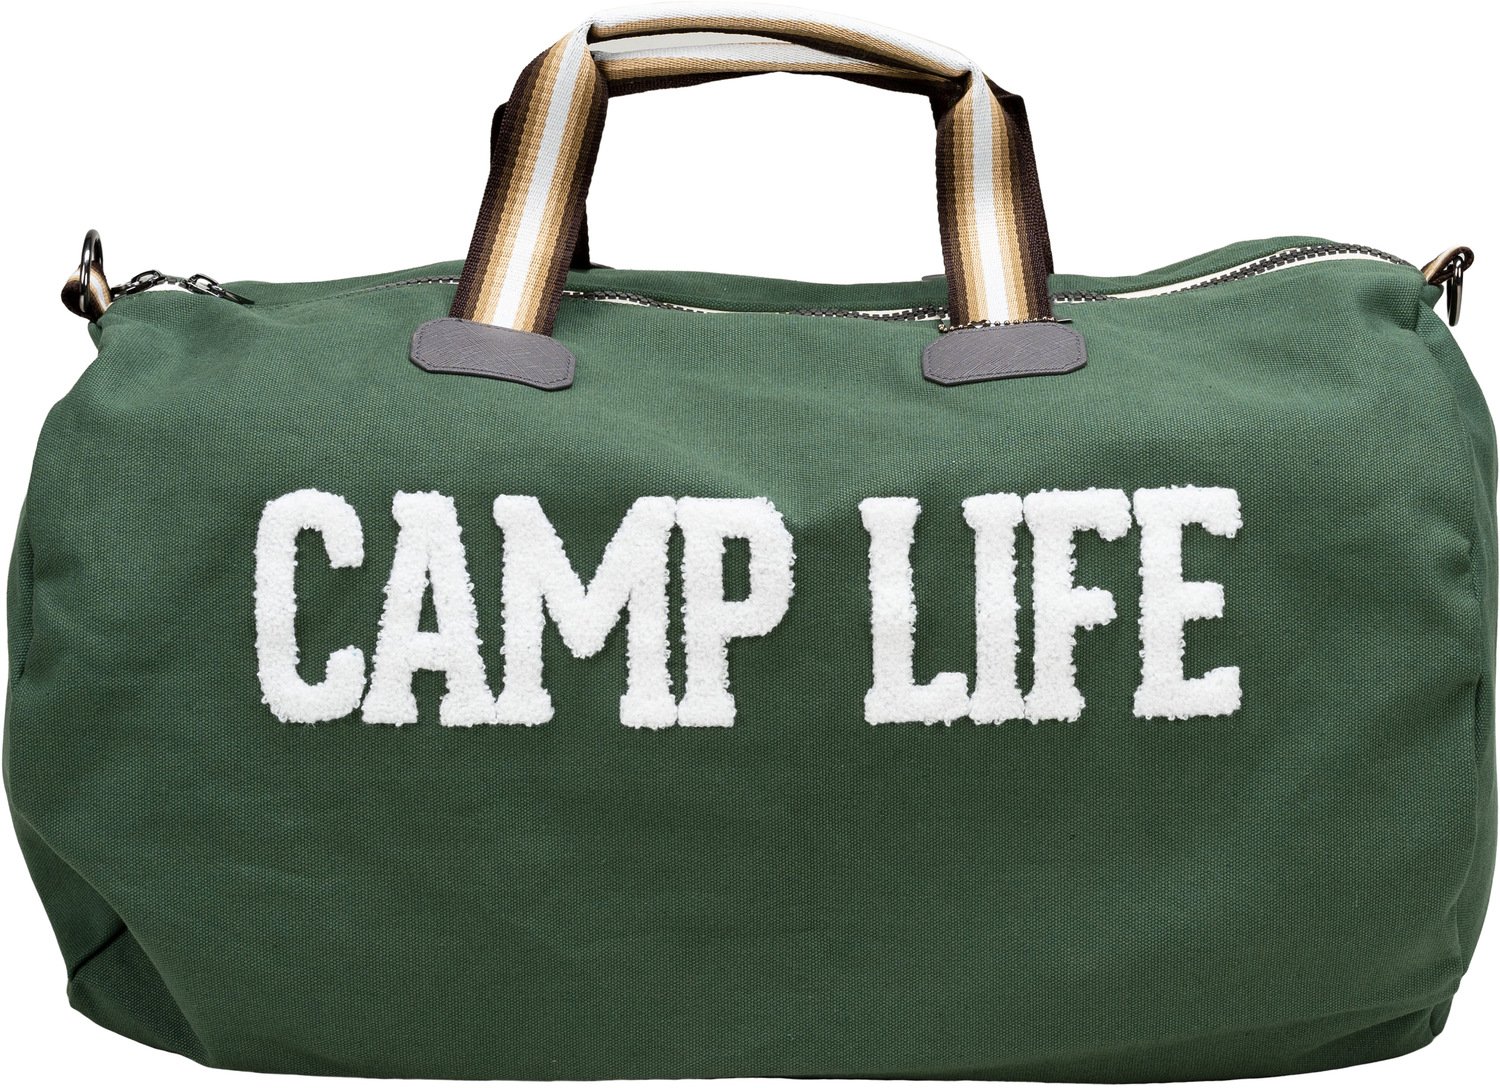 Camp Life by We People - Camp Life - 21.5" x 13" Canvas Duffle Bag